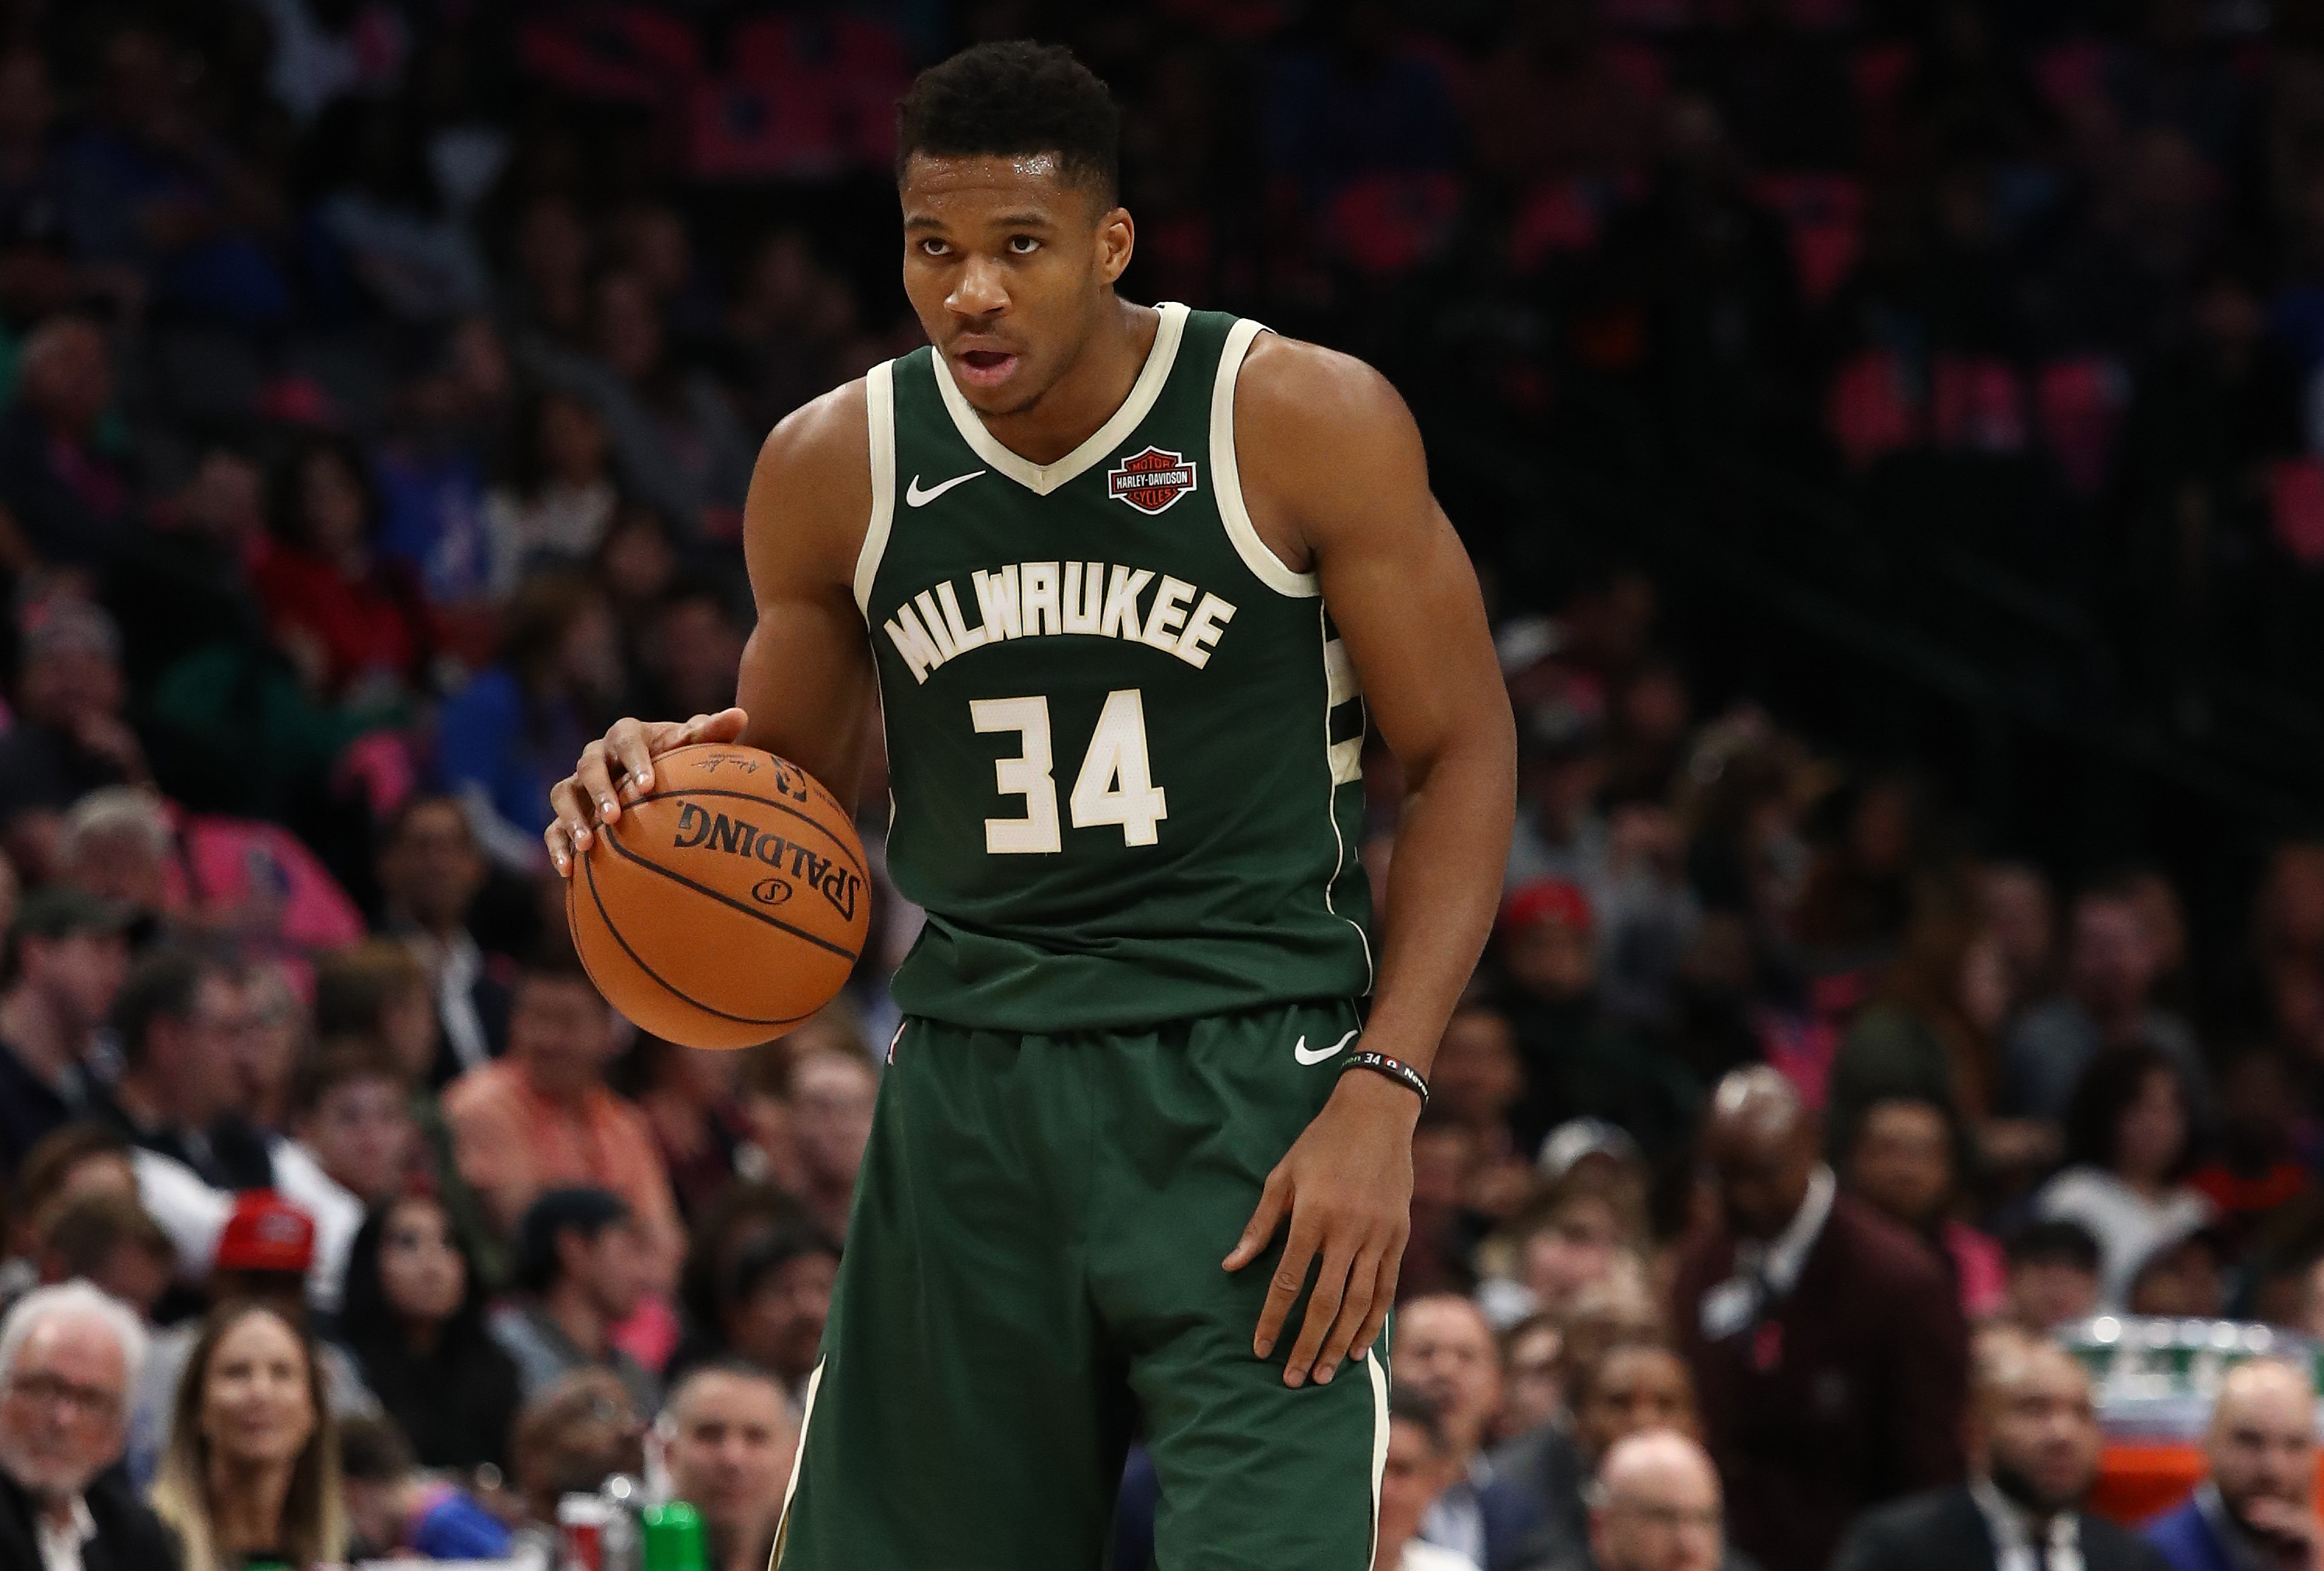 Giannis Antetokounmpo almost missed a game during his rookie year because he couldn't afford a taxi.